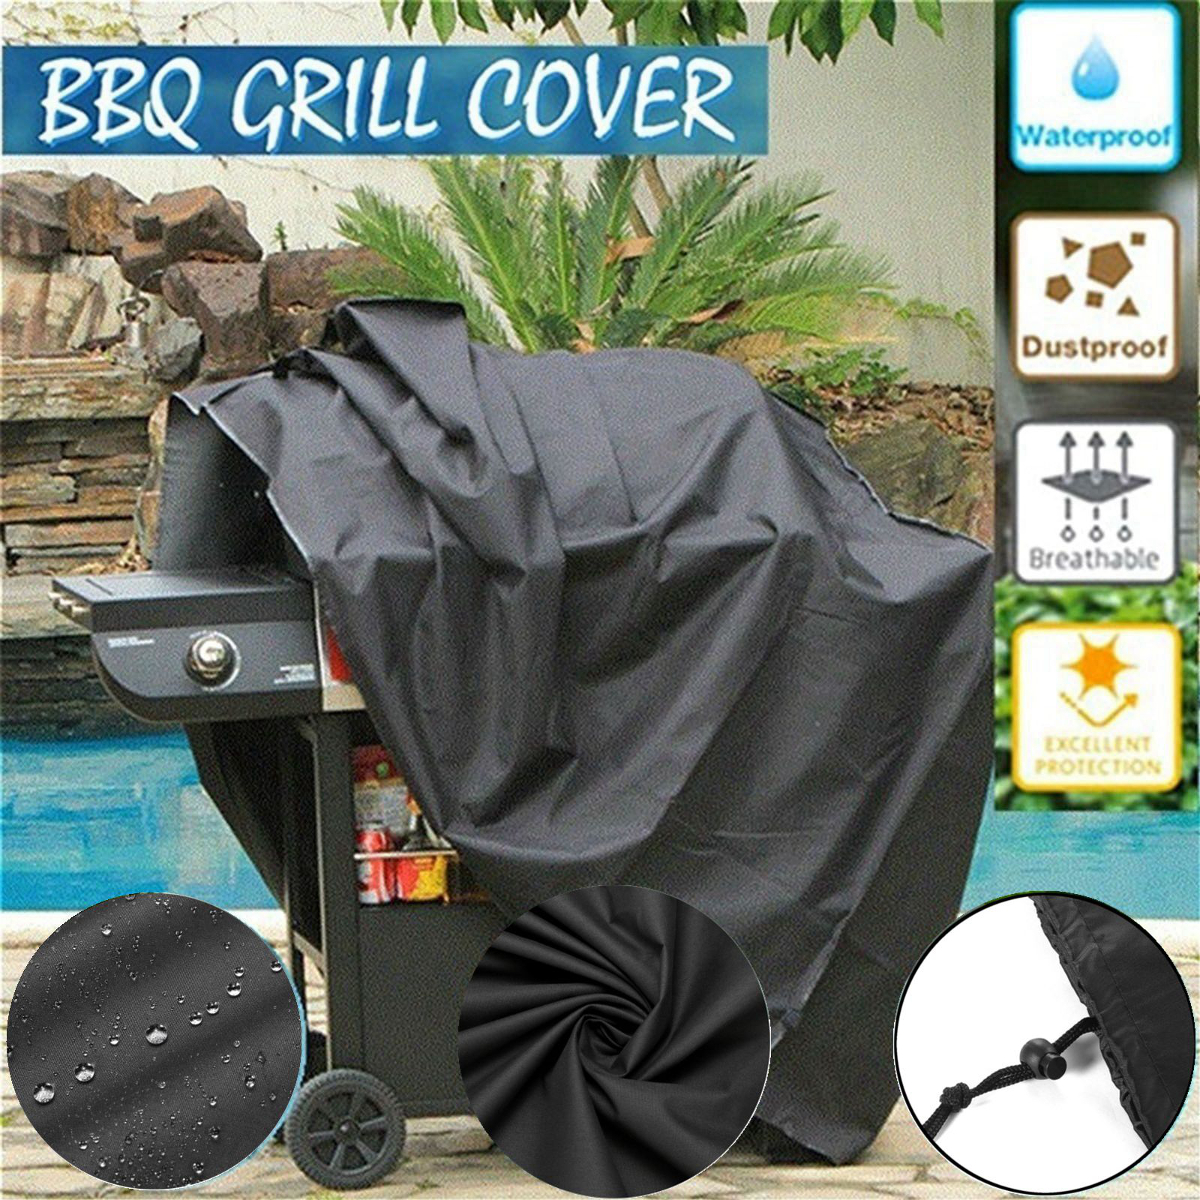 Waterproof-Black-Barbecue-Cover-Anti-Dust-Rain-Cover-Garden-Yard-Grill-Cover-Protector-For-Outdoor-B-1742519-1